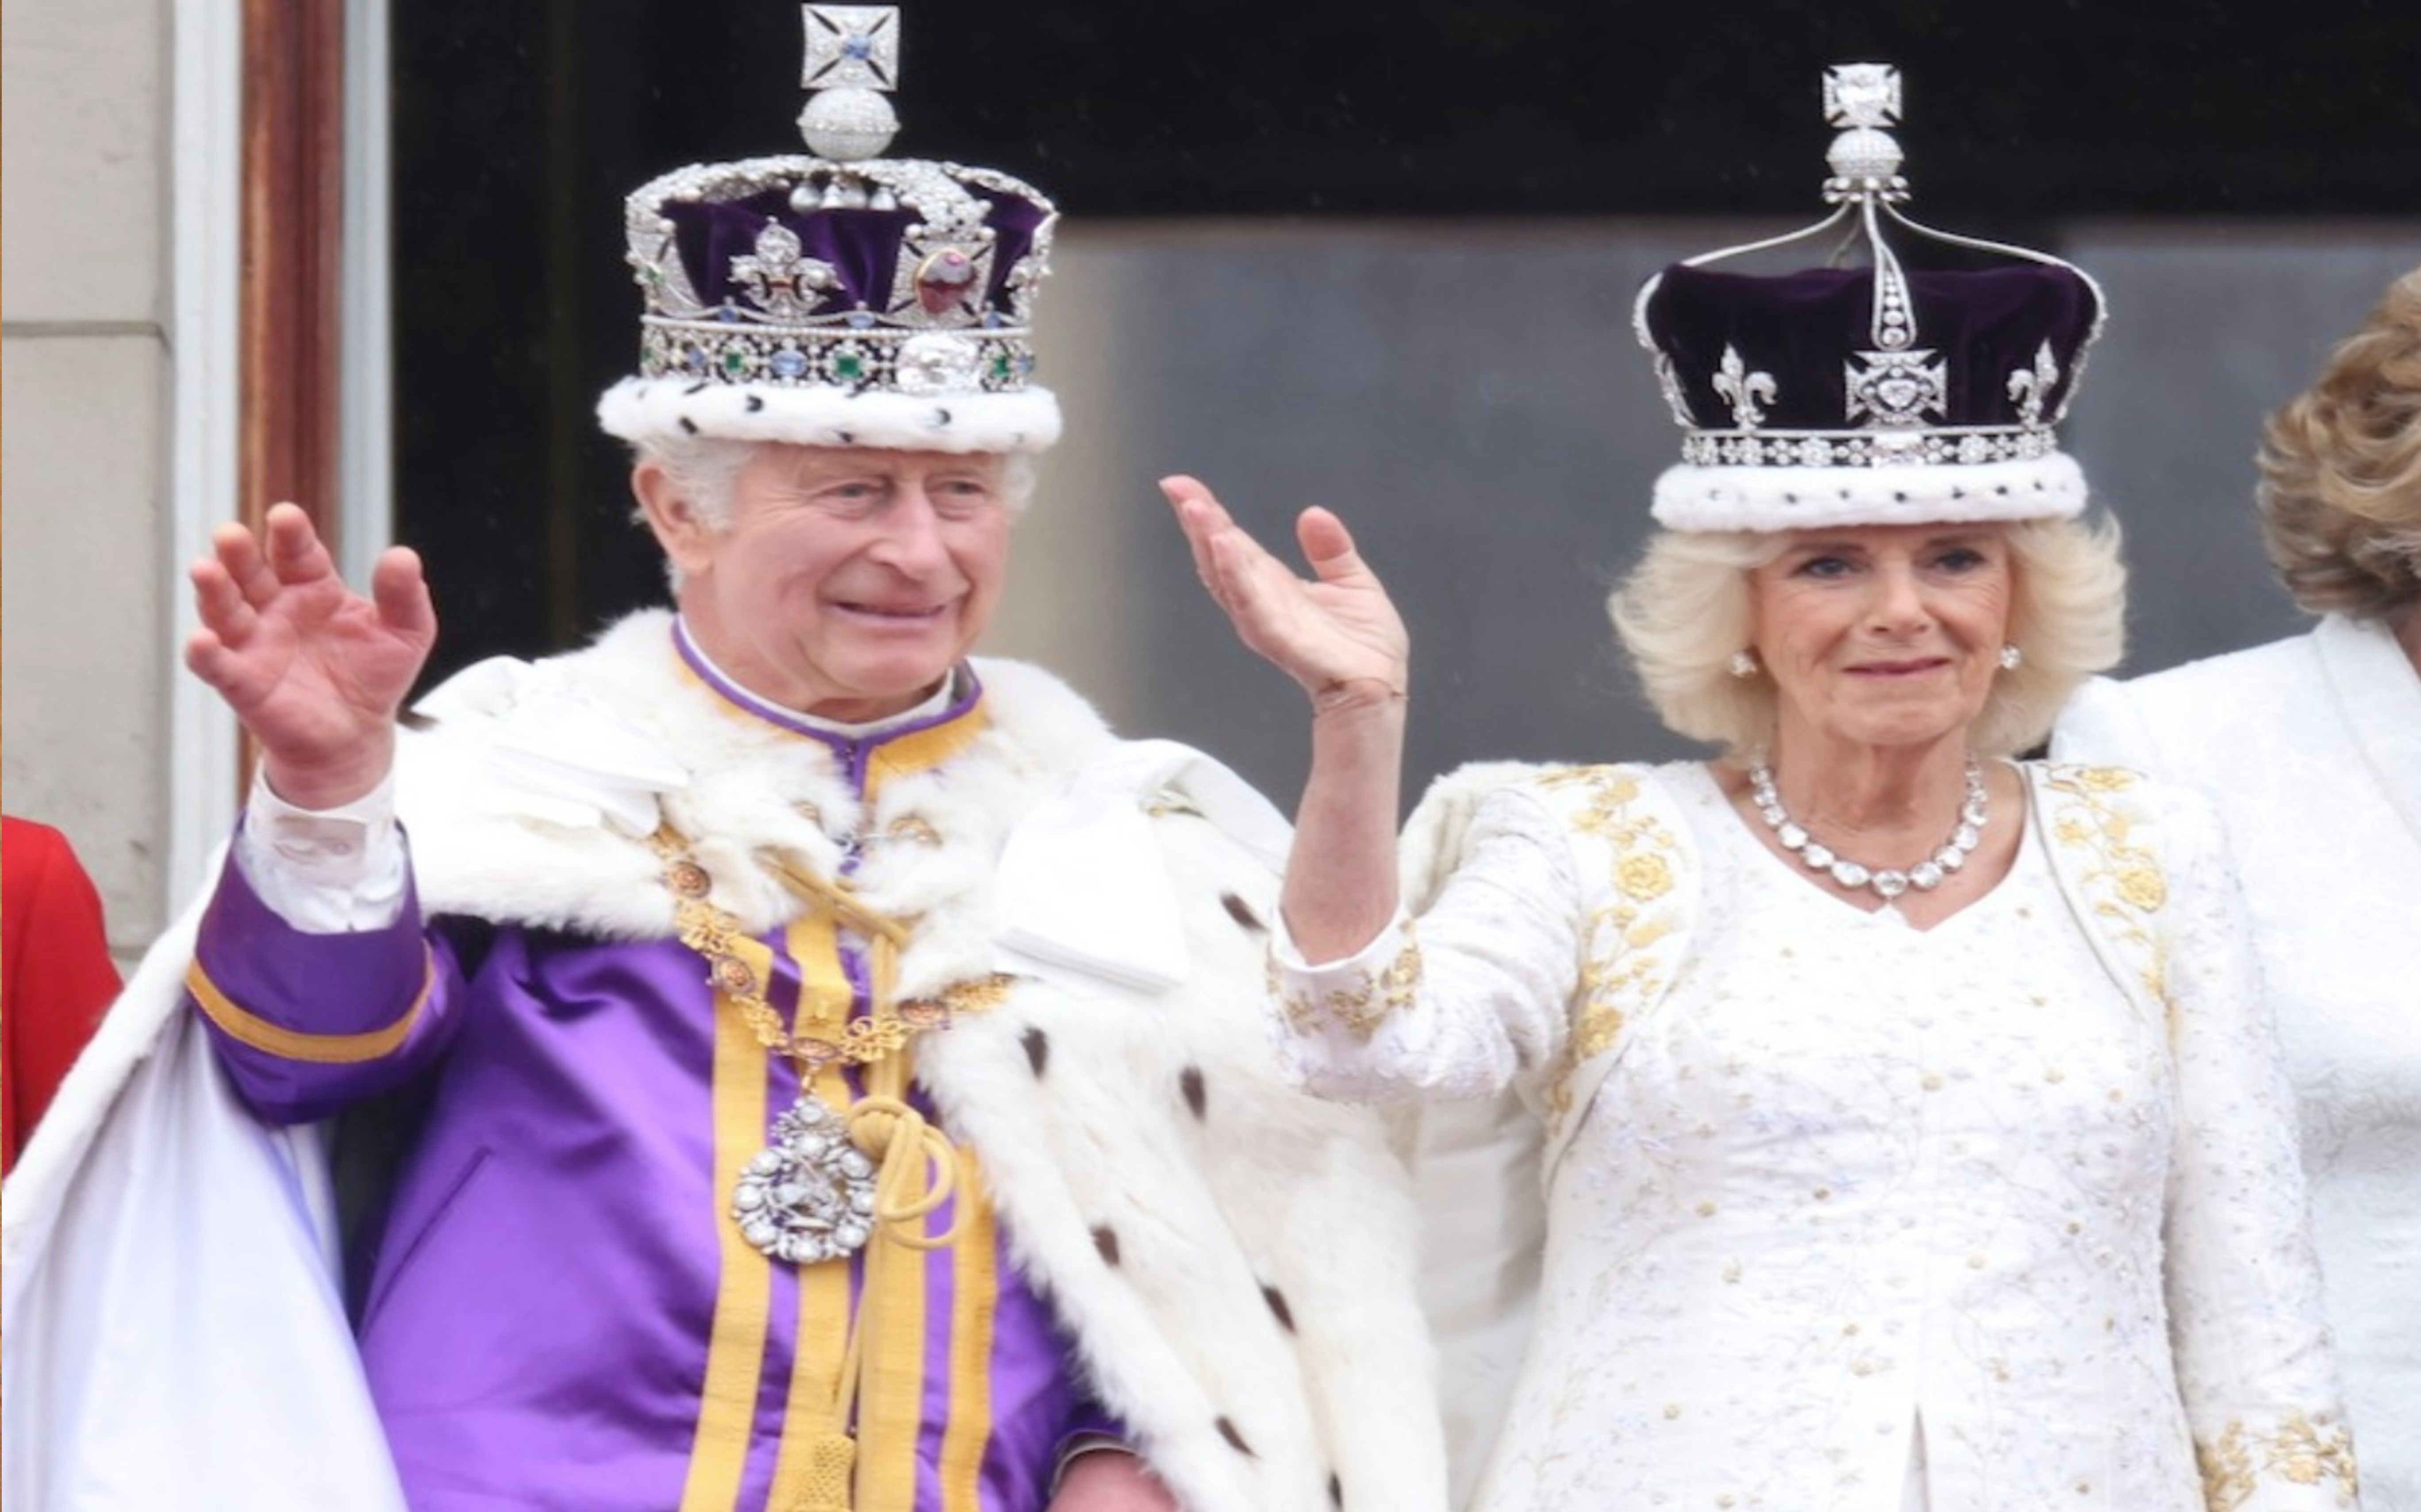 Watch: King Charles III is crowned at Westminster Abbey, celebrity guests attend the ceremony